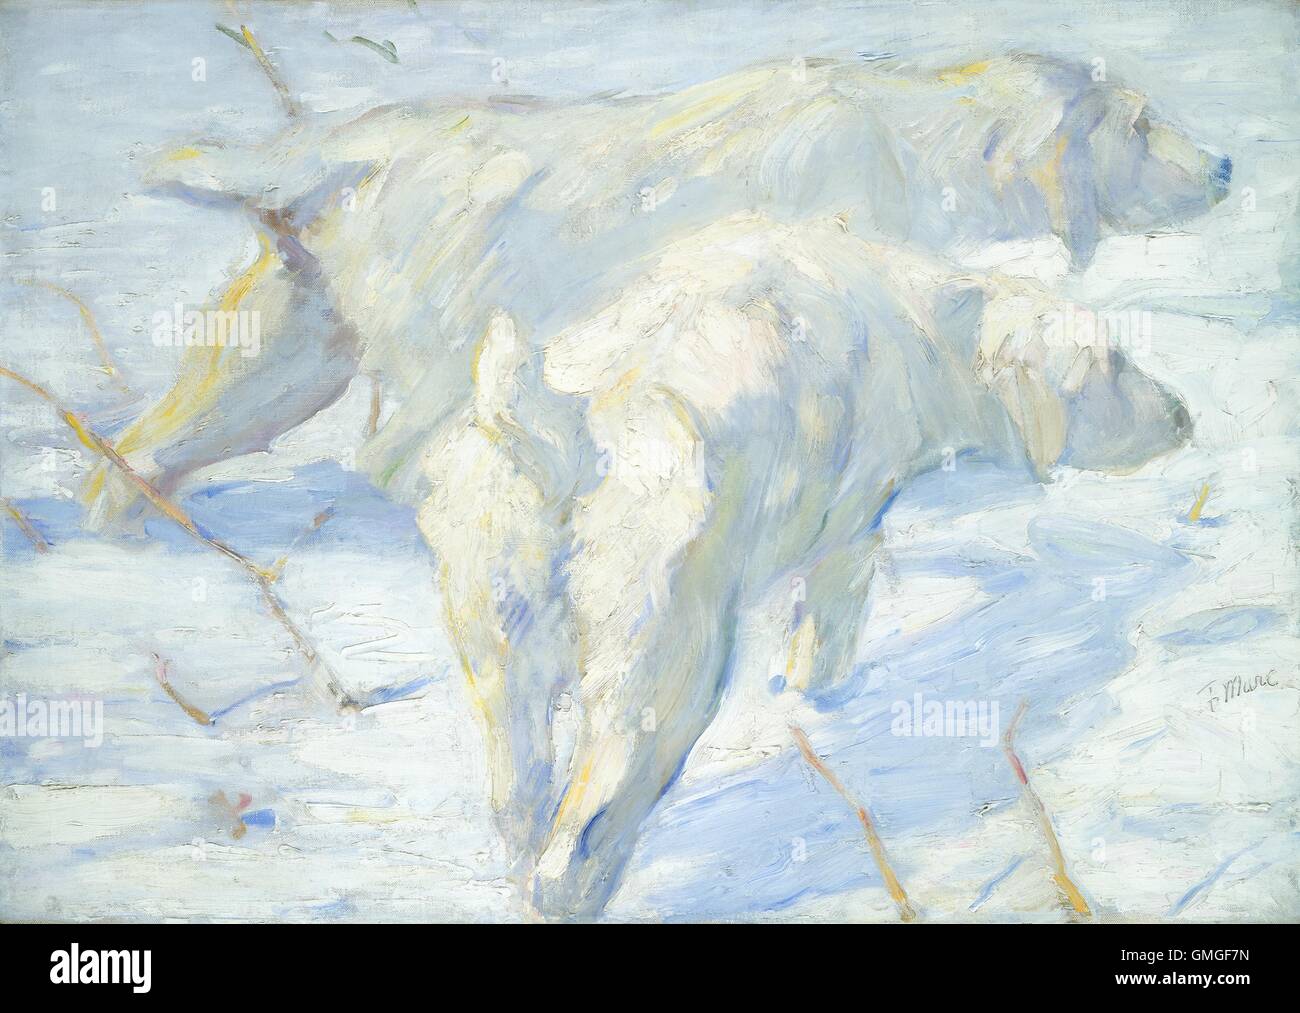 Siberian Dogs in the Snow, by Franz Marc, 1909-10, German painting, oil on canvas. This realist image was painted shortly before Marc embraced abstraction and became a key figure of the German Expressionist movement as founding member of Der Blaue Reiter (BSLOC 2016 6 96) Stock Photo